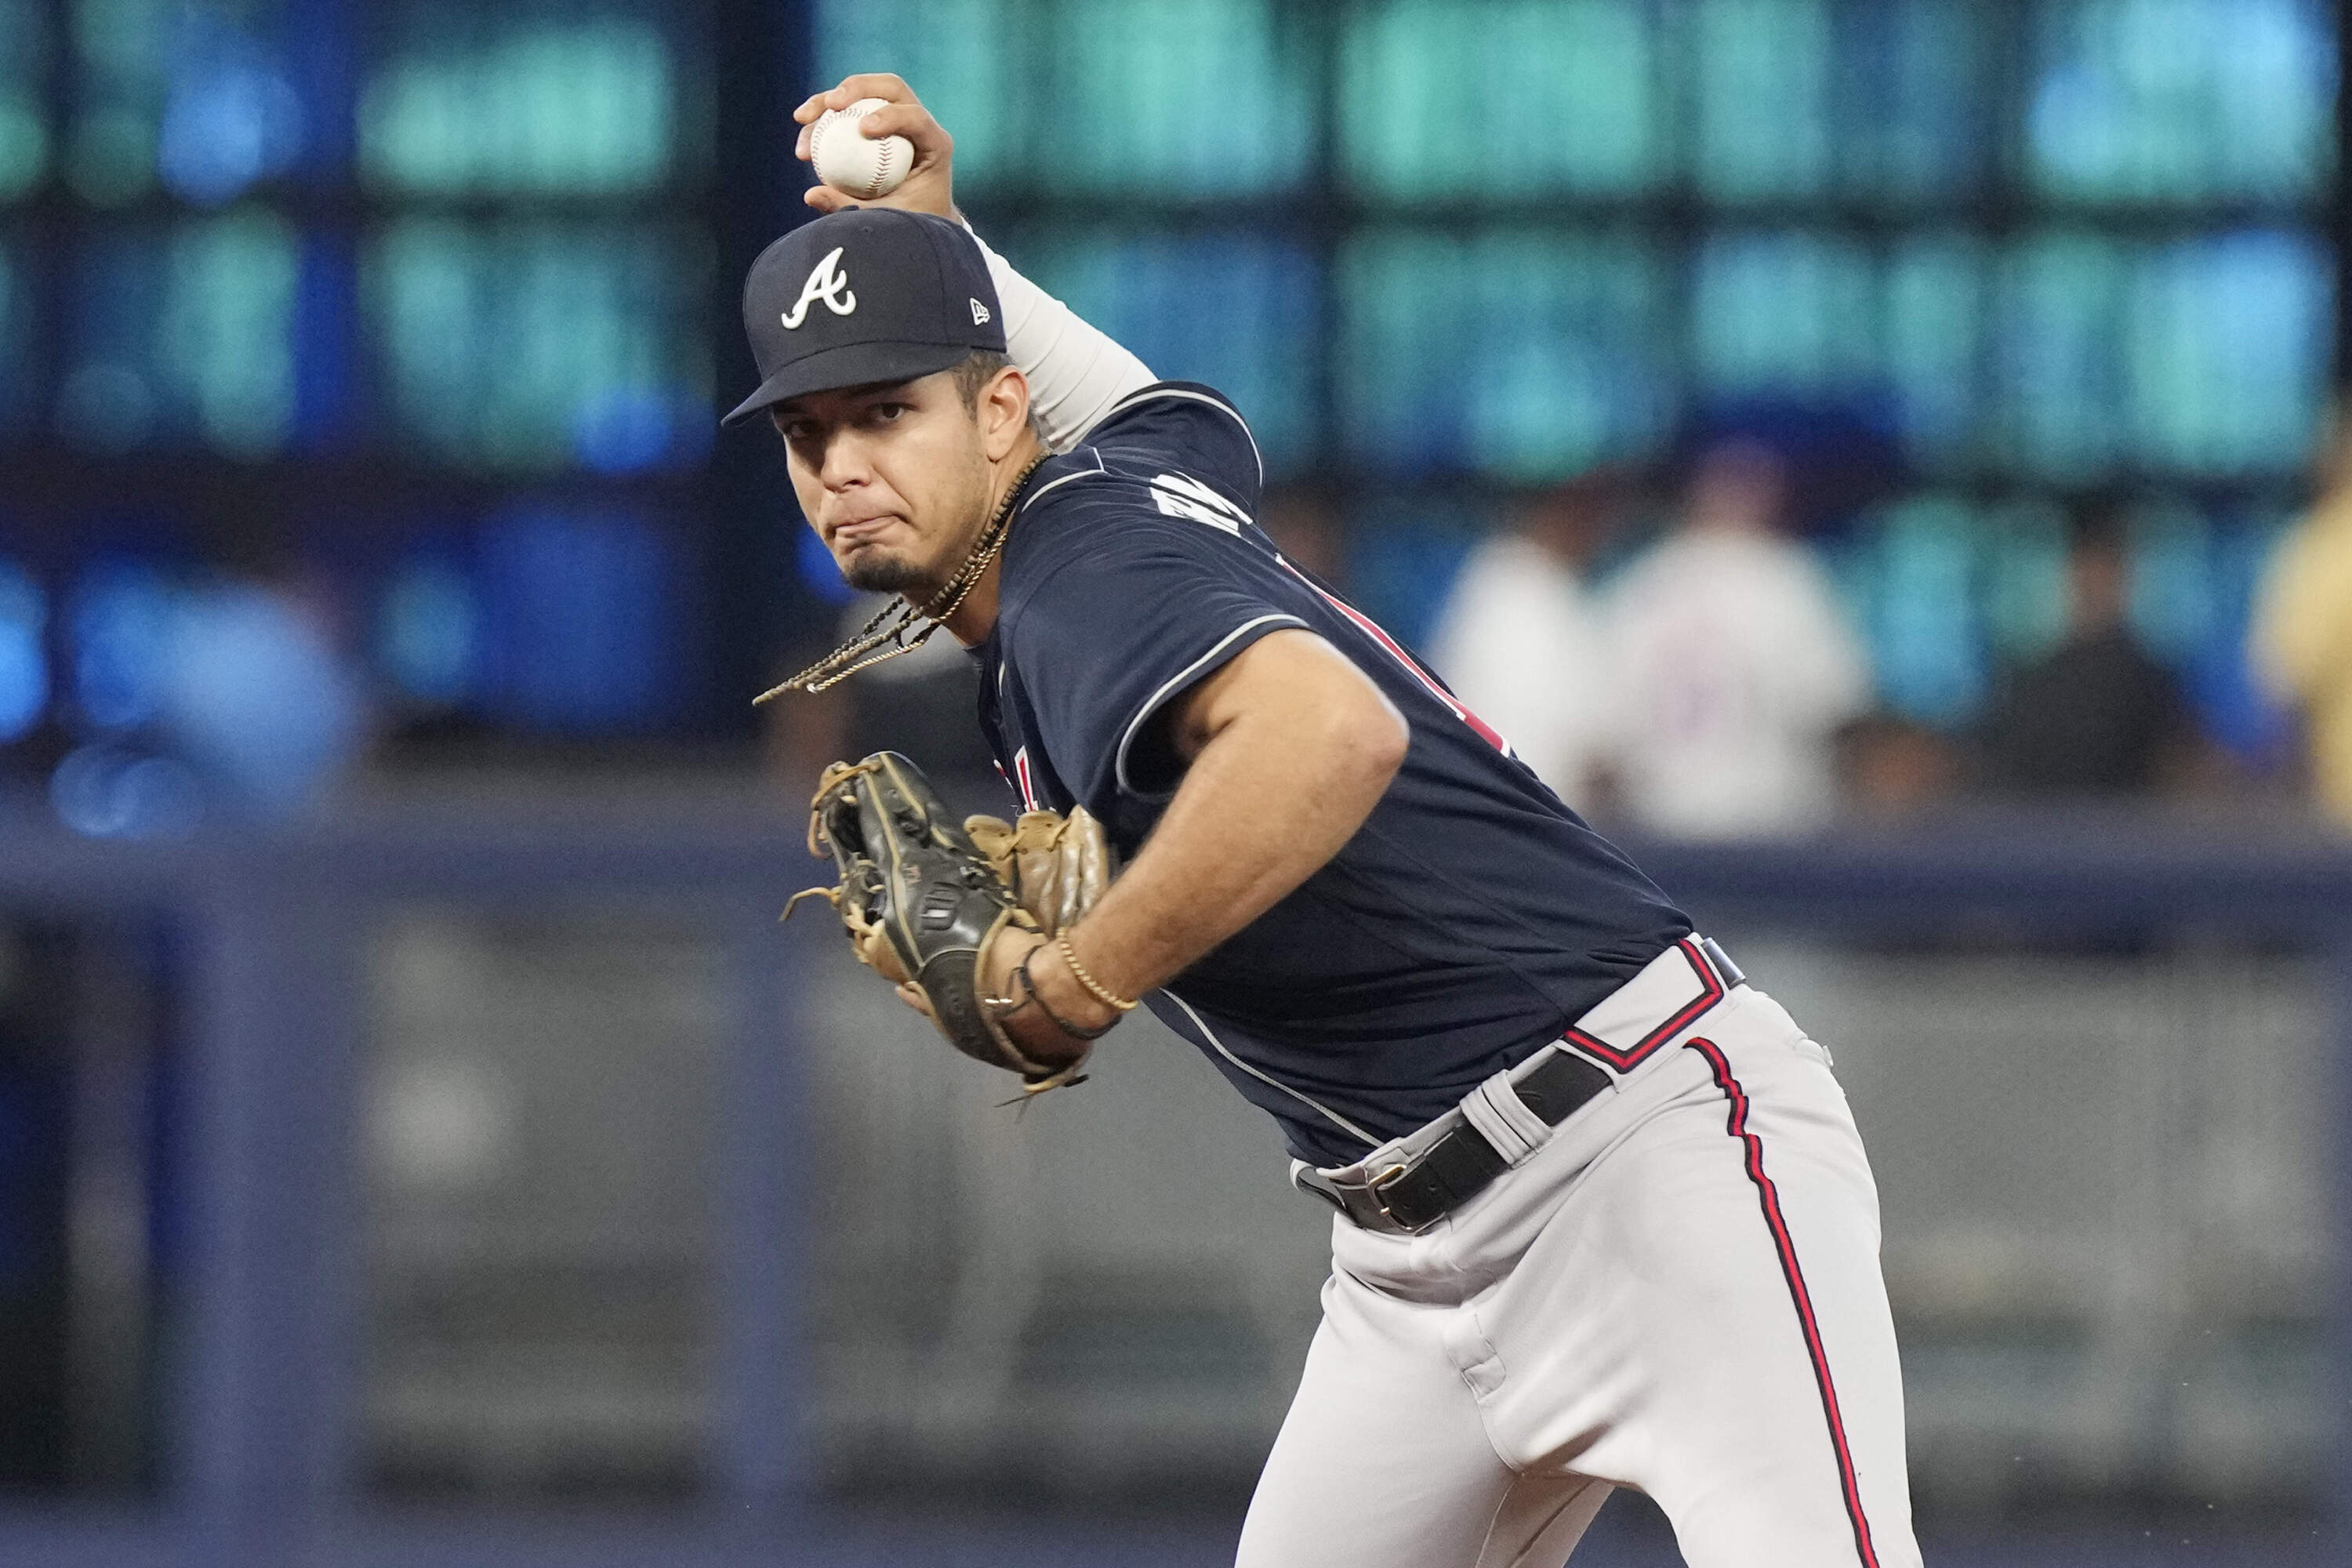 Atlanta Braves shortstop Vaughn Grissom aims to throw to first base during a baseball game against the Miami Marlins, Thursday, May 4, 2023, in Miami. (Marta Lavandier/AP)